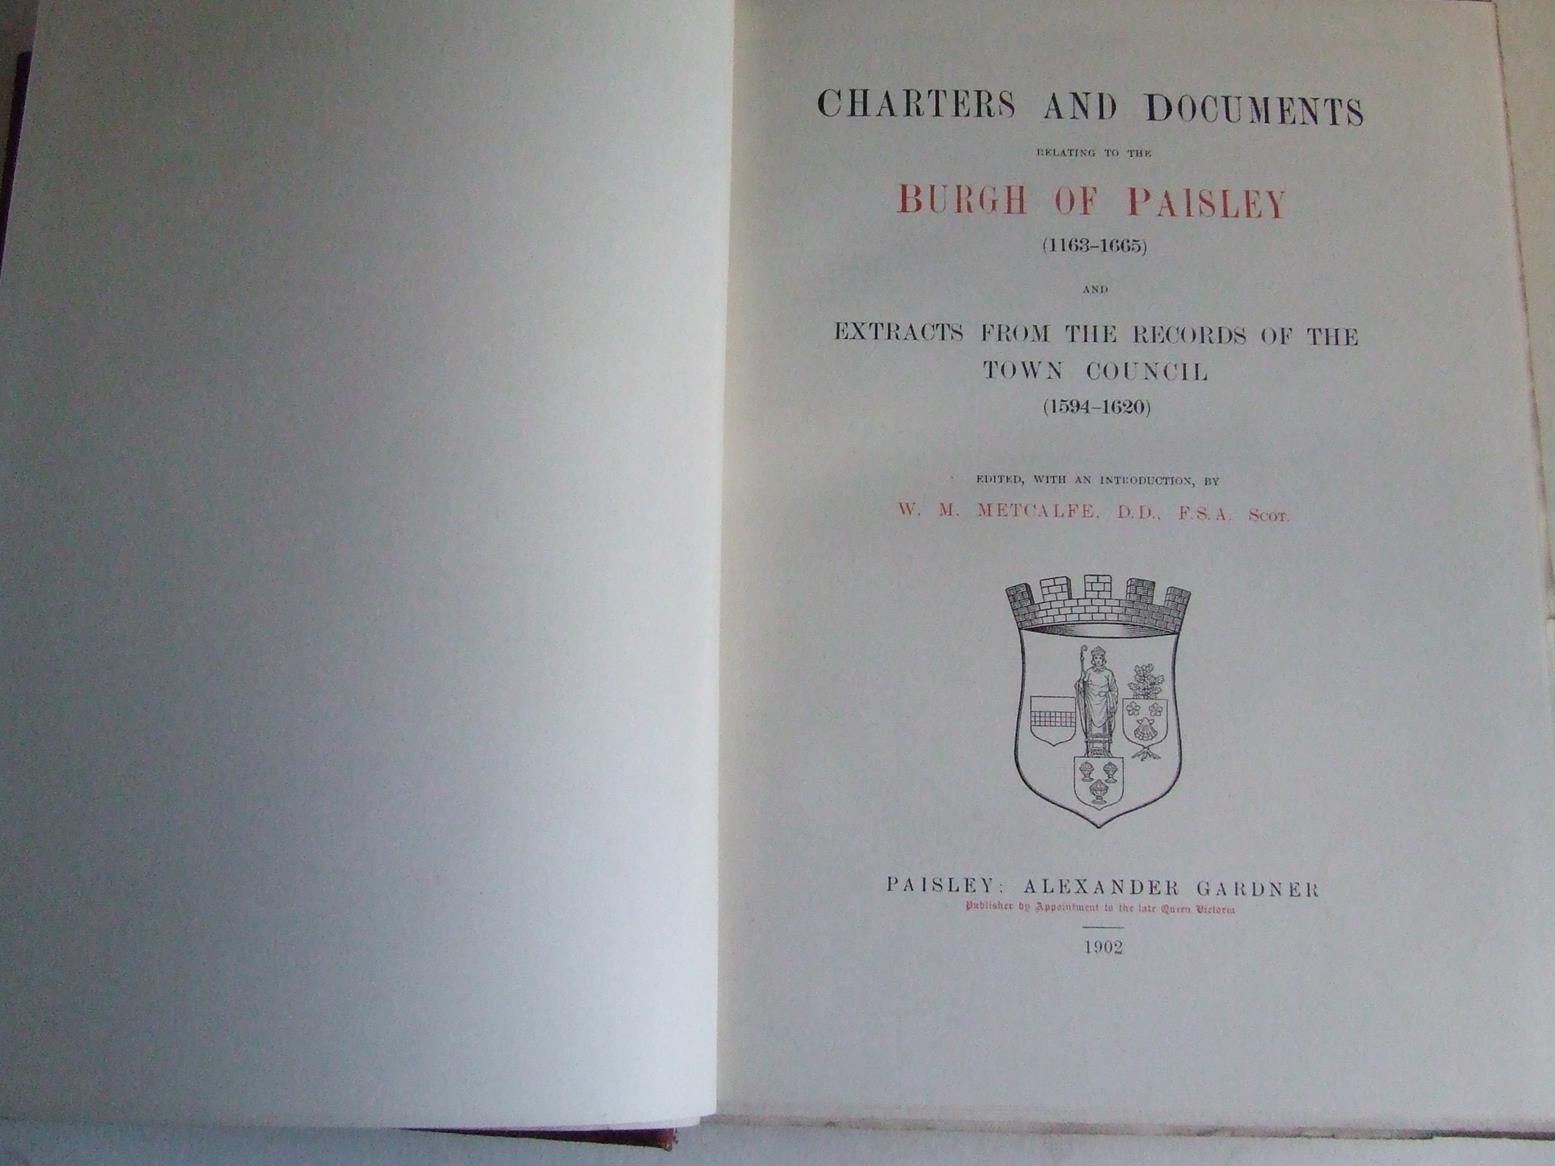 Charters and Documents relating to the Burgh of Paisley (1163-1665)